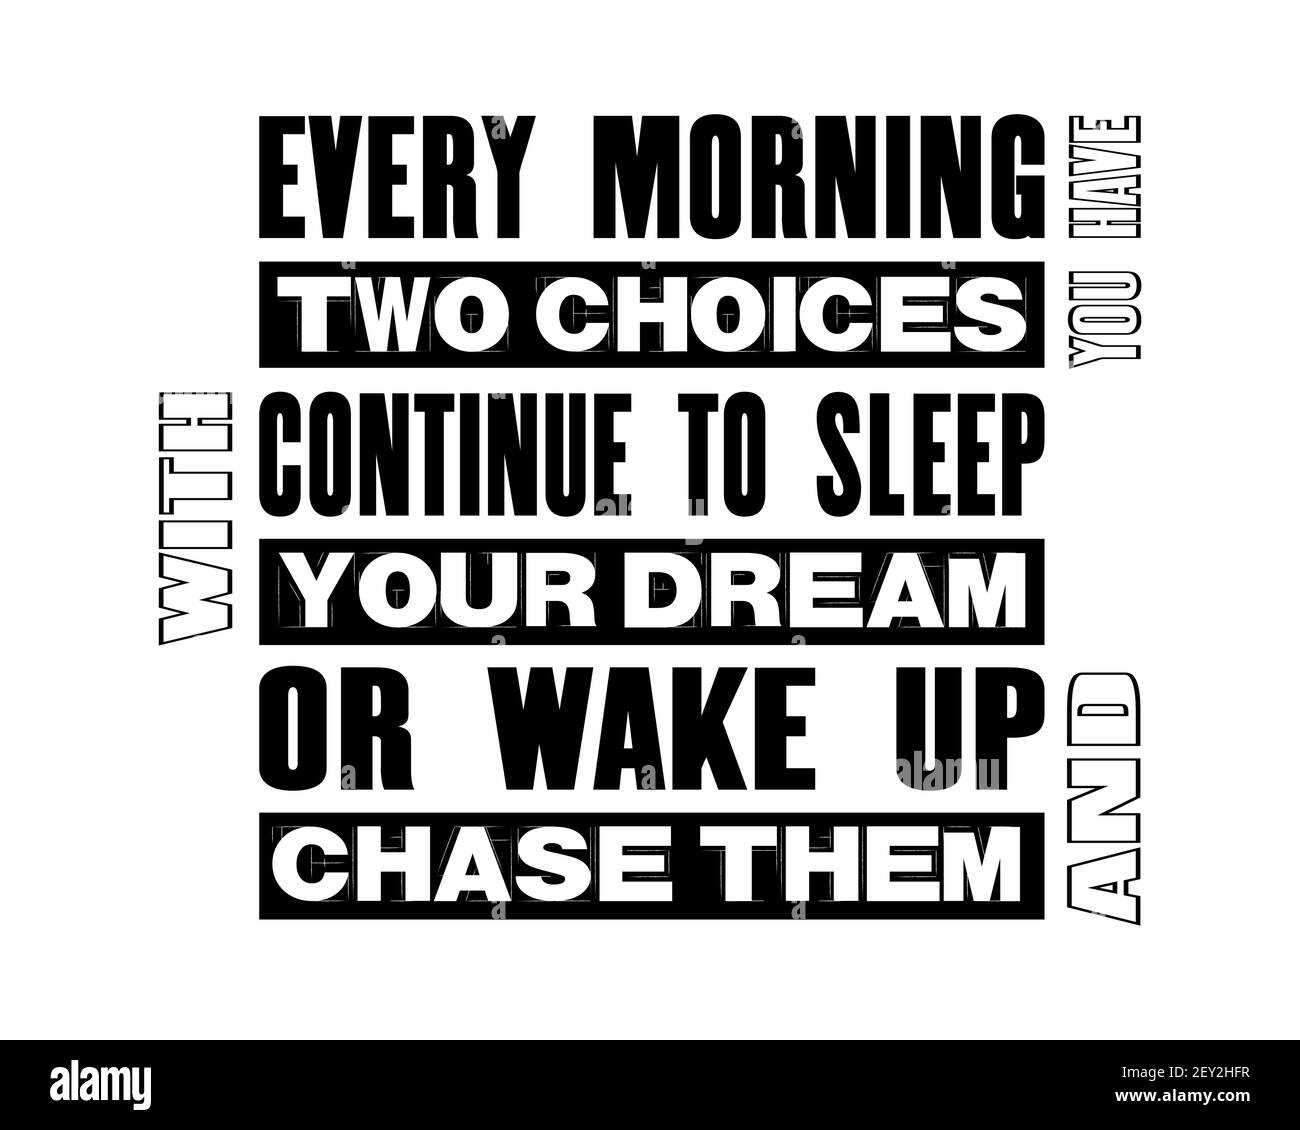 Inspiring motivation quote with text Every Morning You Have Two Choices Continue To Sleep With Your Dream Or Wake Up And Chase Them. Vector typography Stock Vector